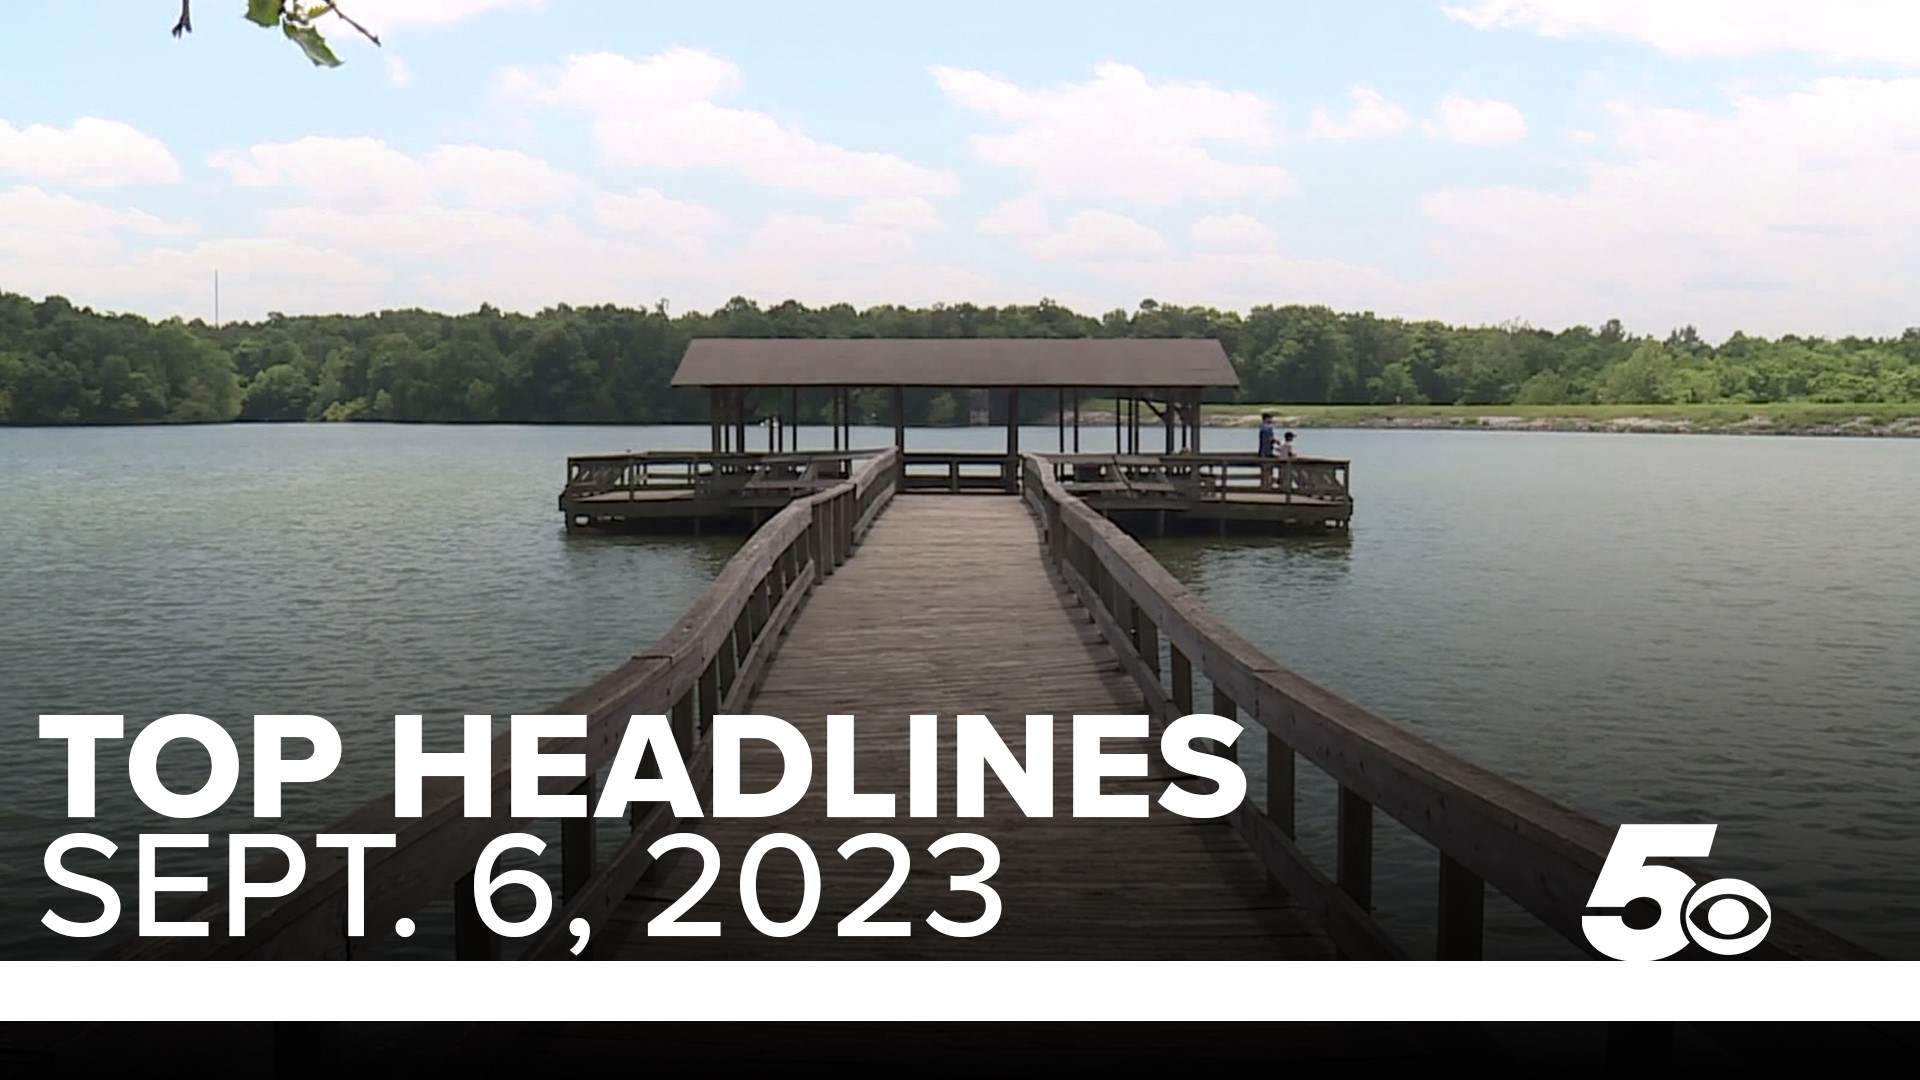 Top headlines for Northwest Arkansas and the River Valley for September 6, 2023.